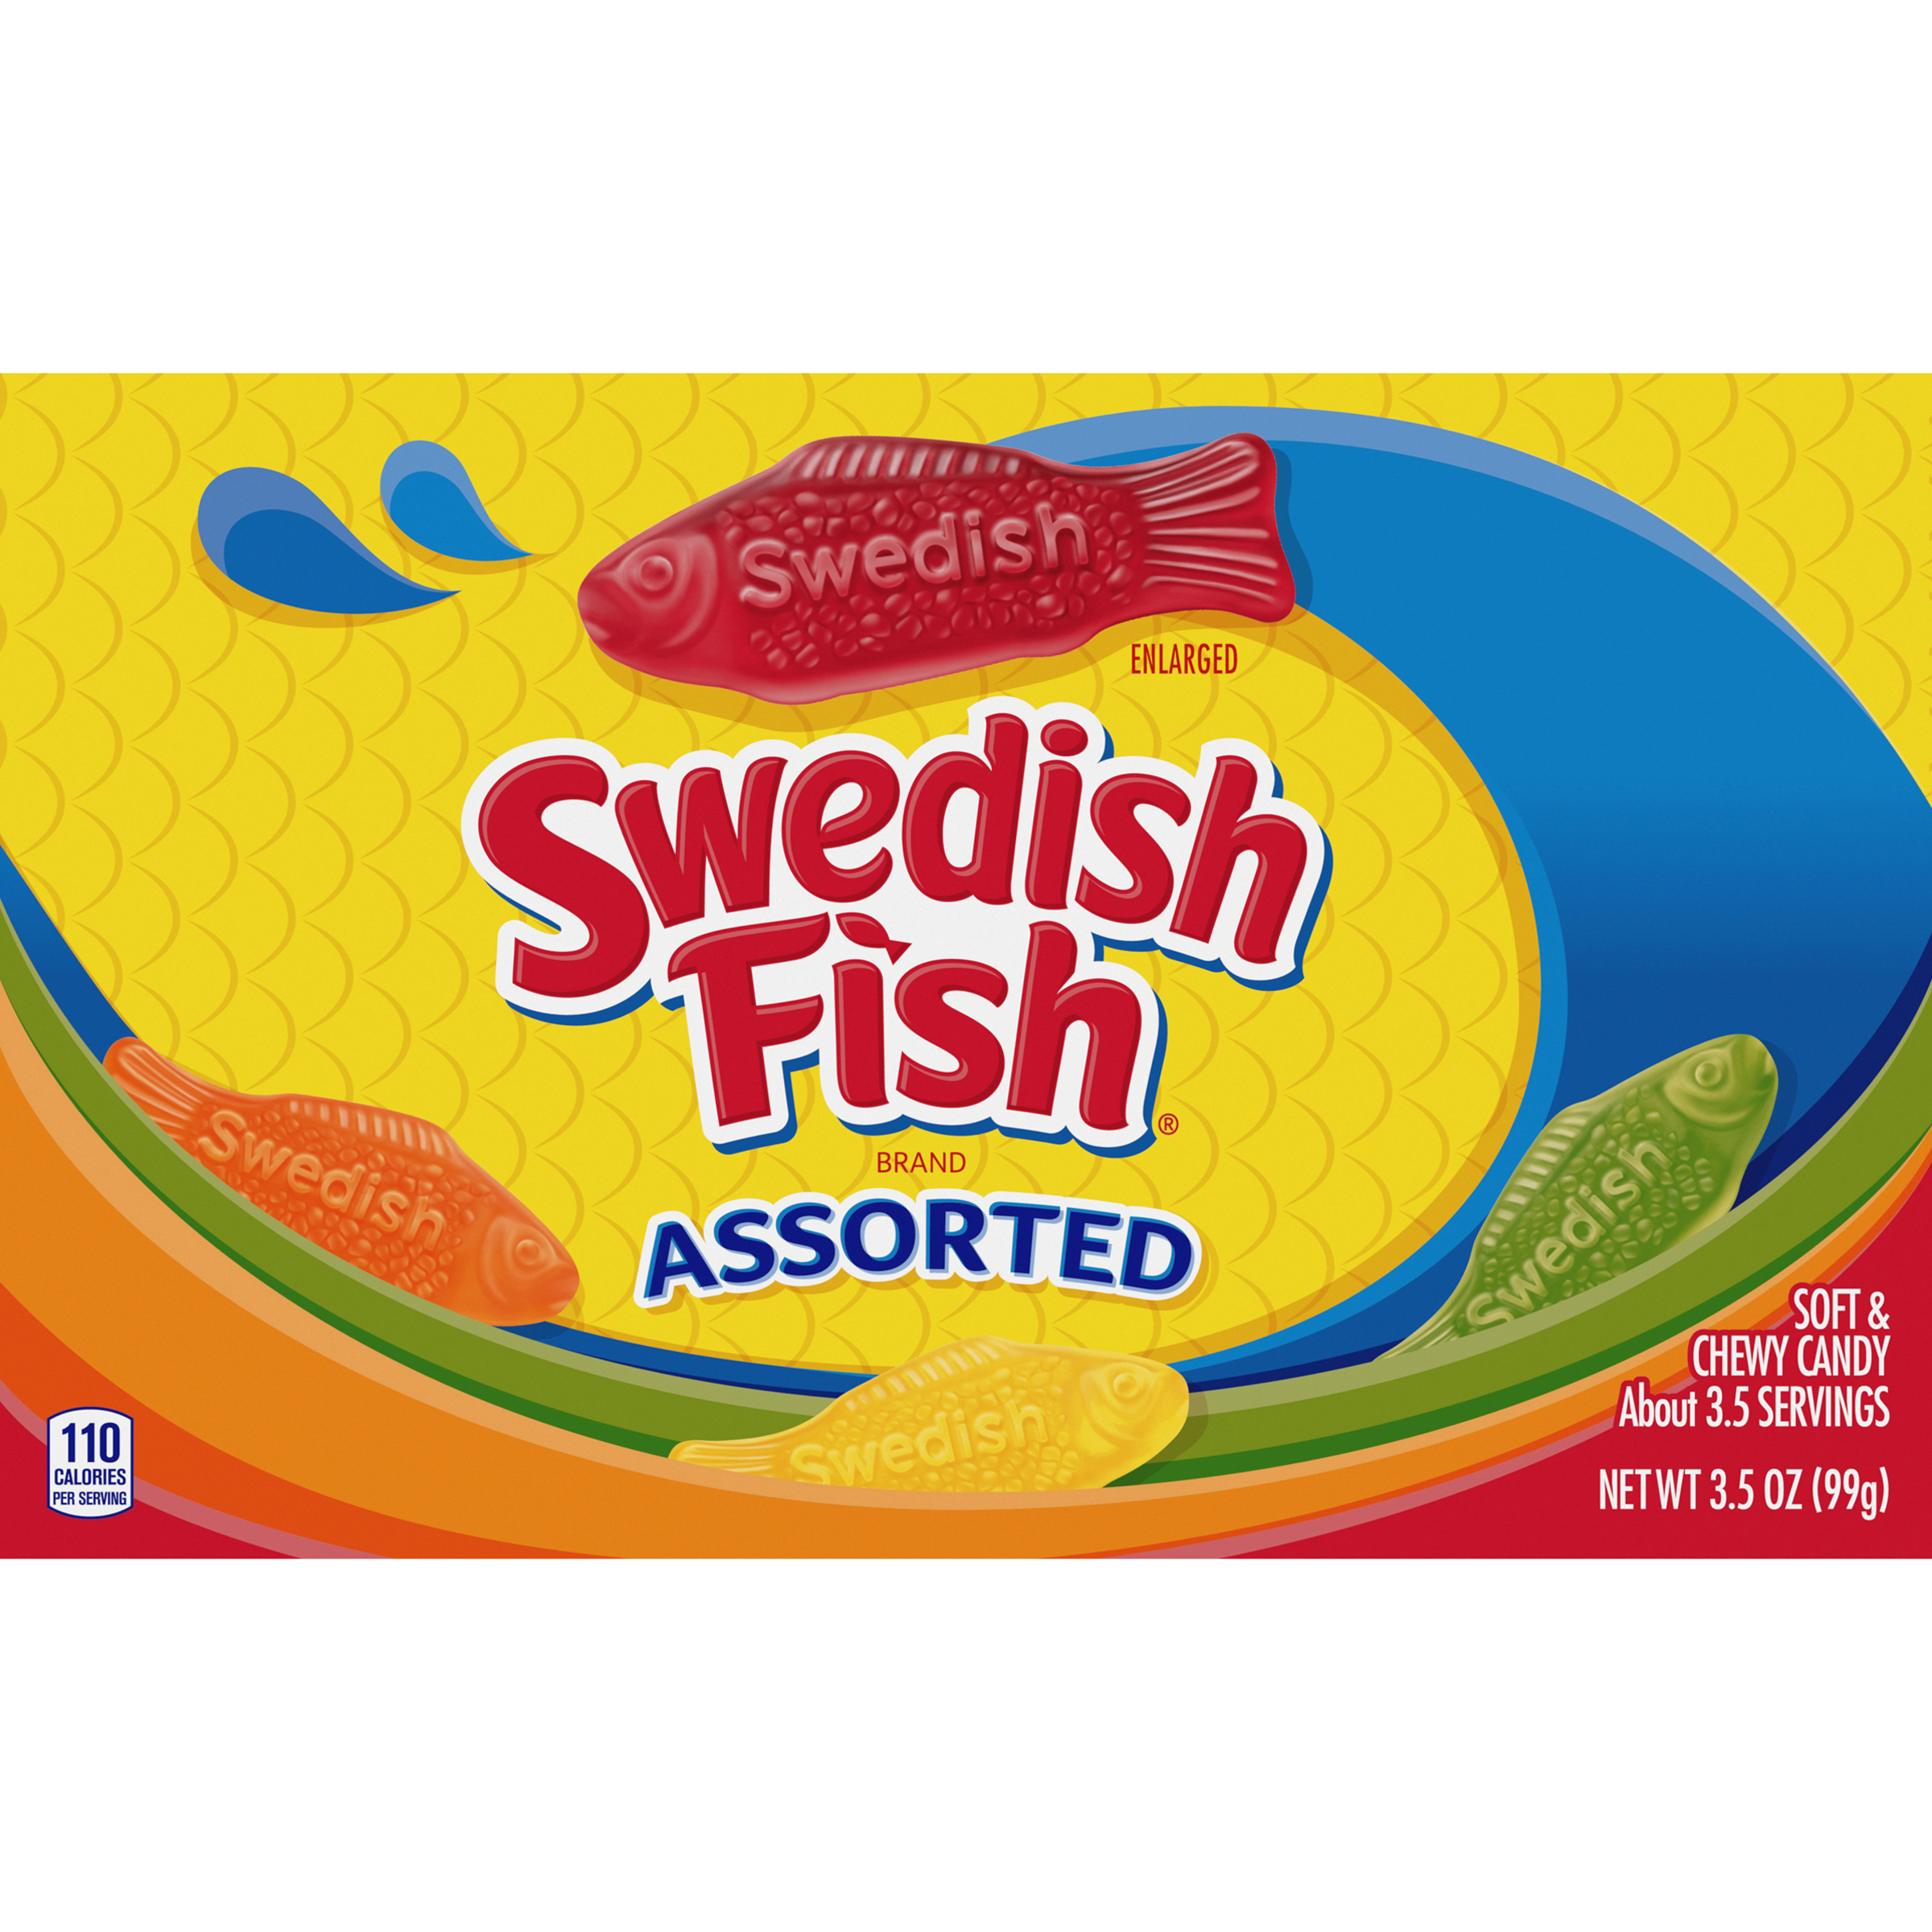 SWEDISH FISH Assorted Soft & Chewy Candy, 3.5 oz-1